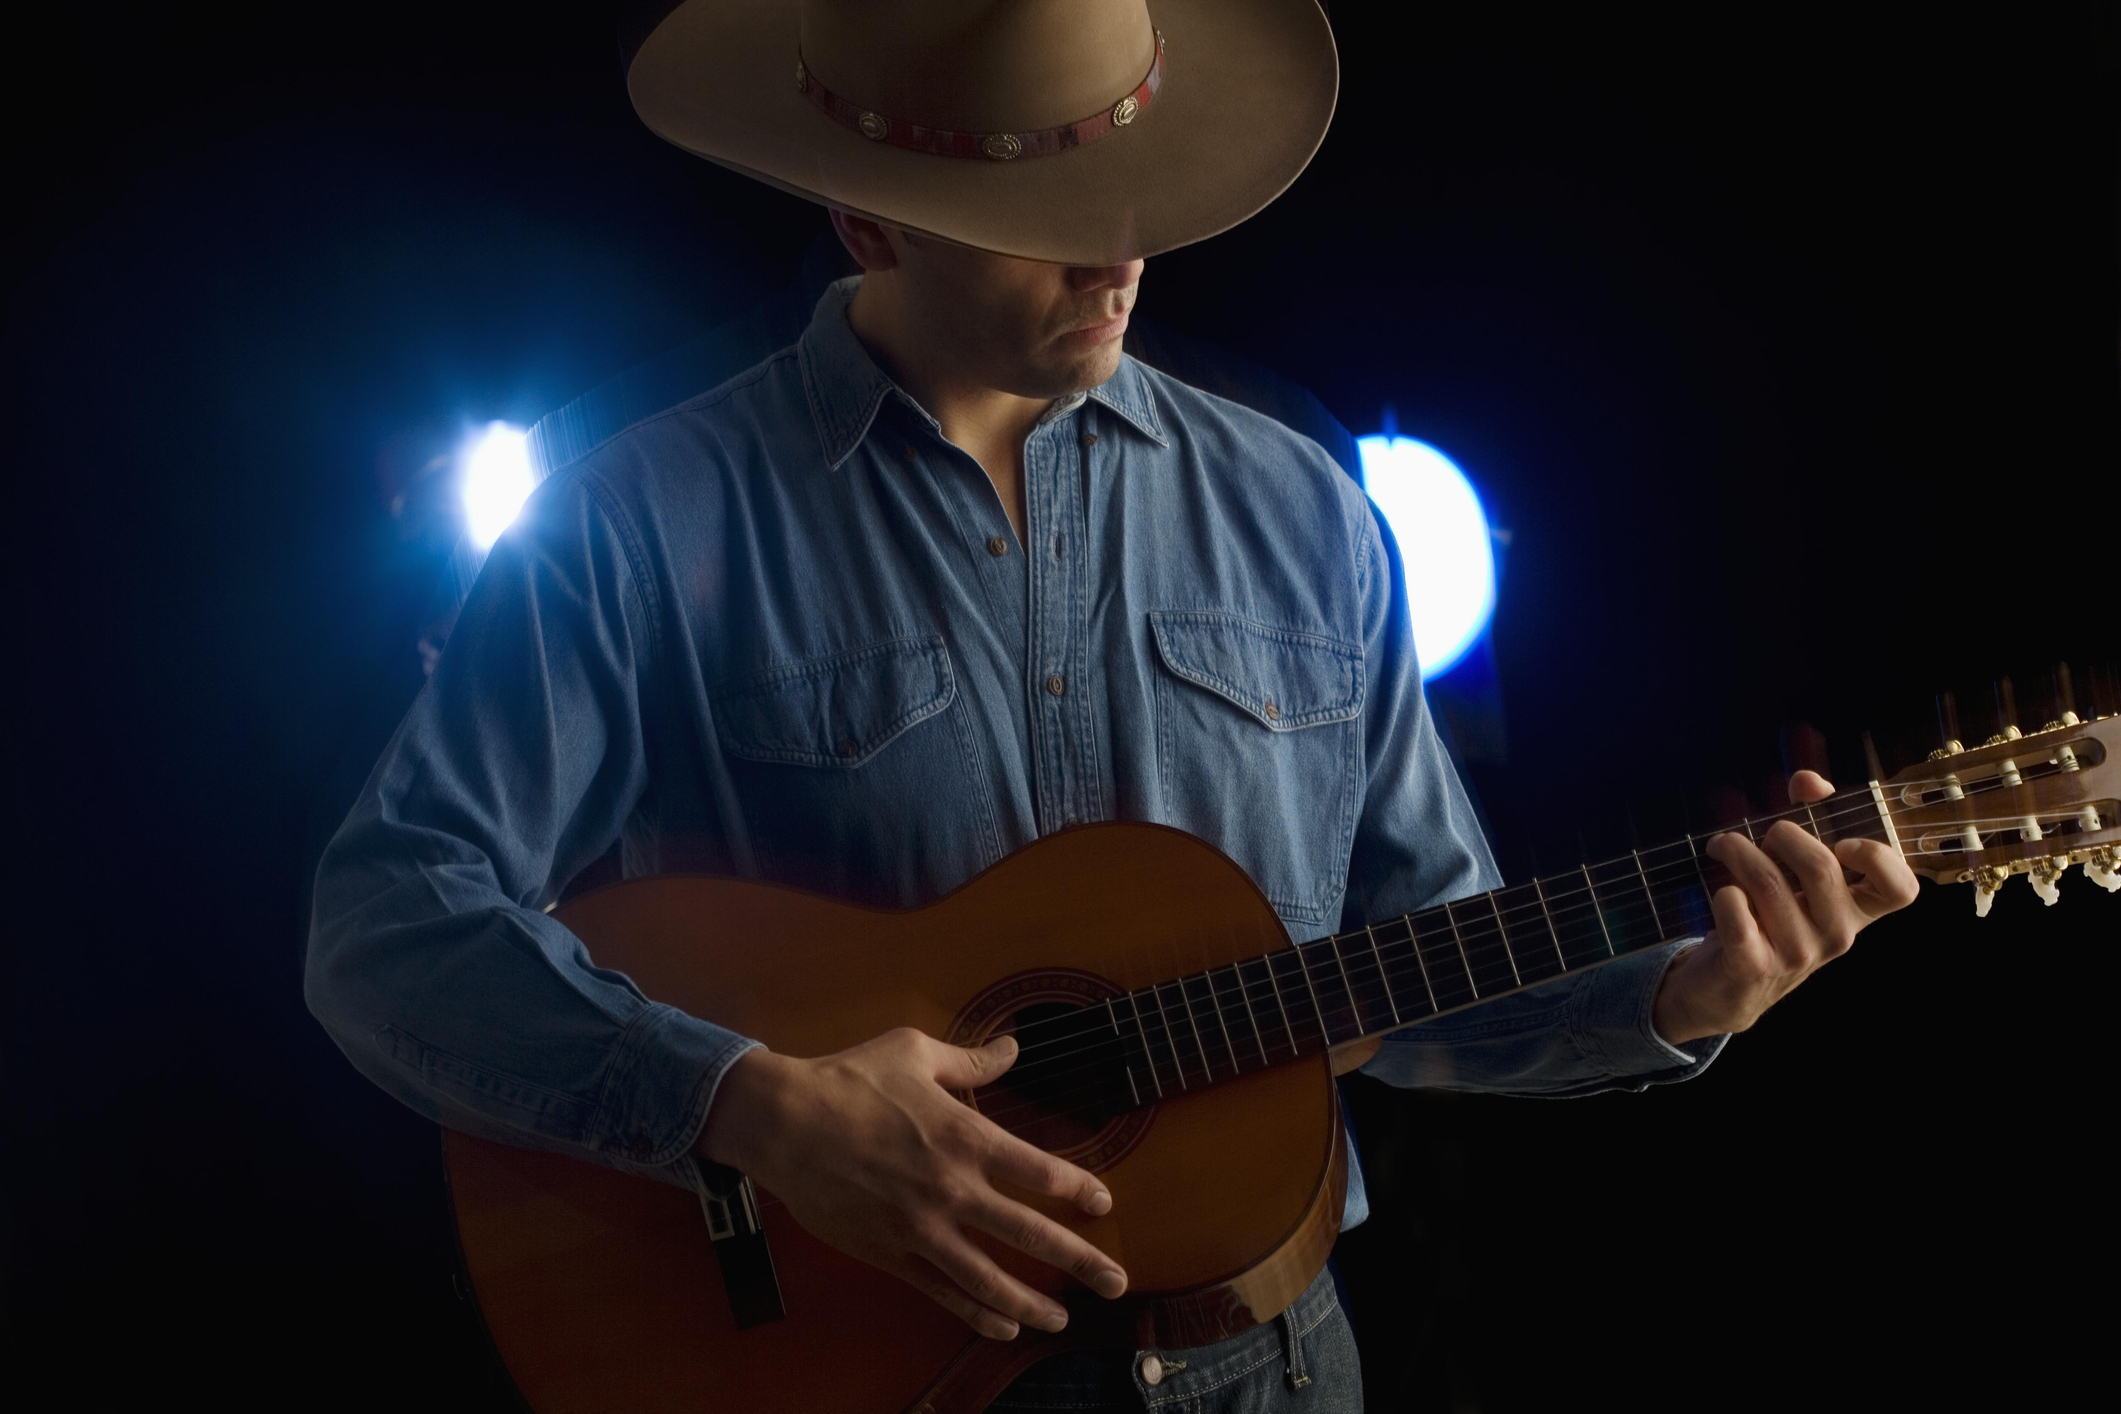 A man wearing a wide-brimmed hat and playing guitar